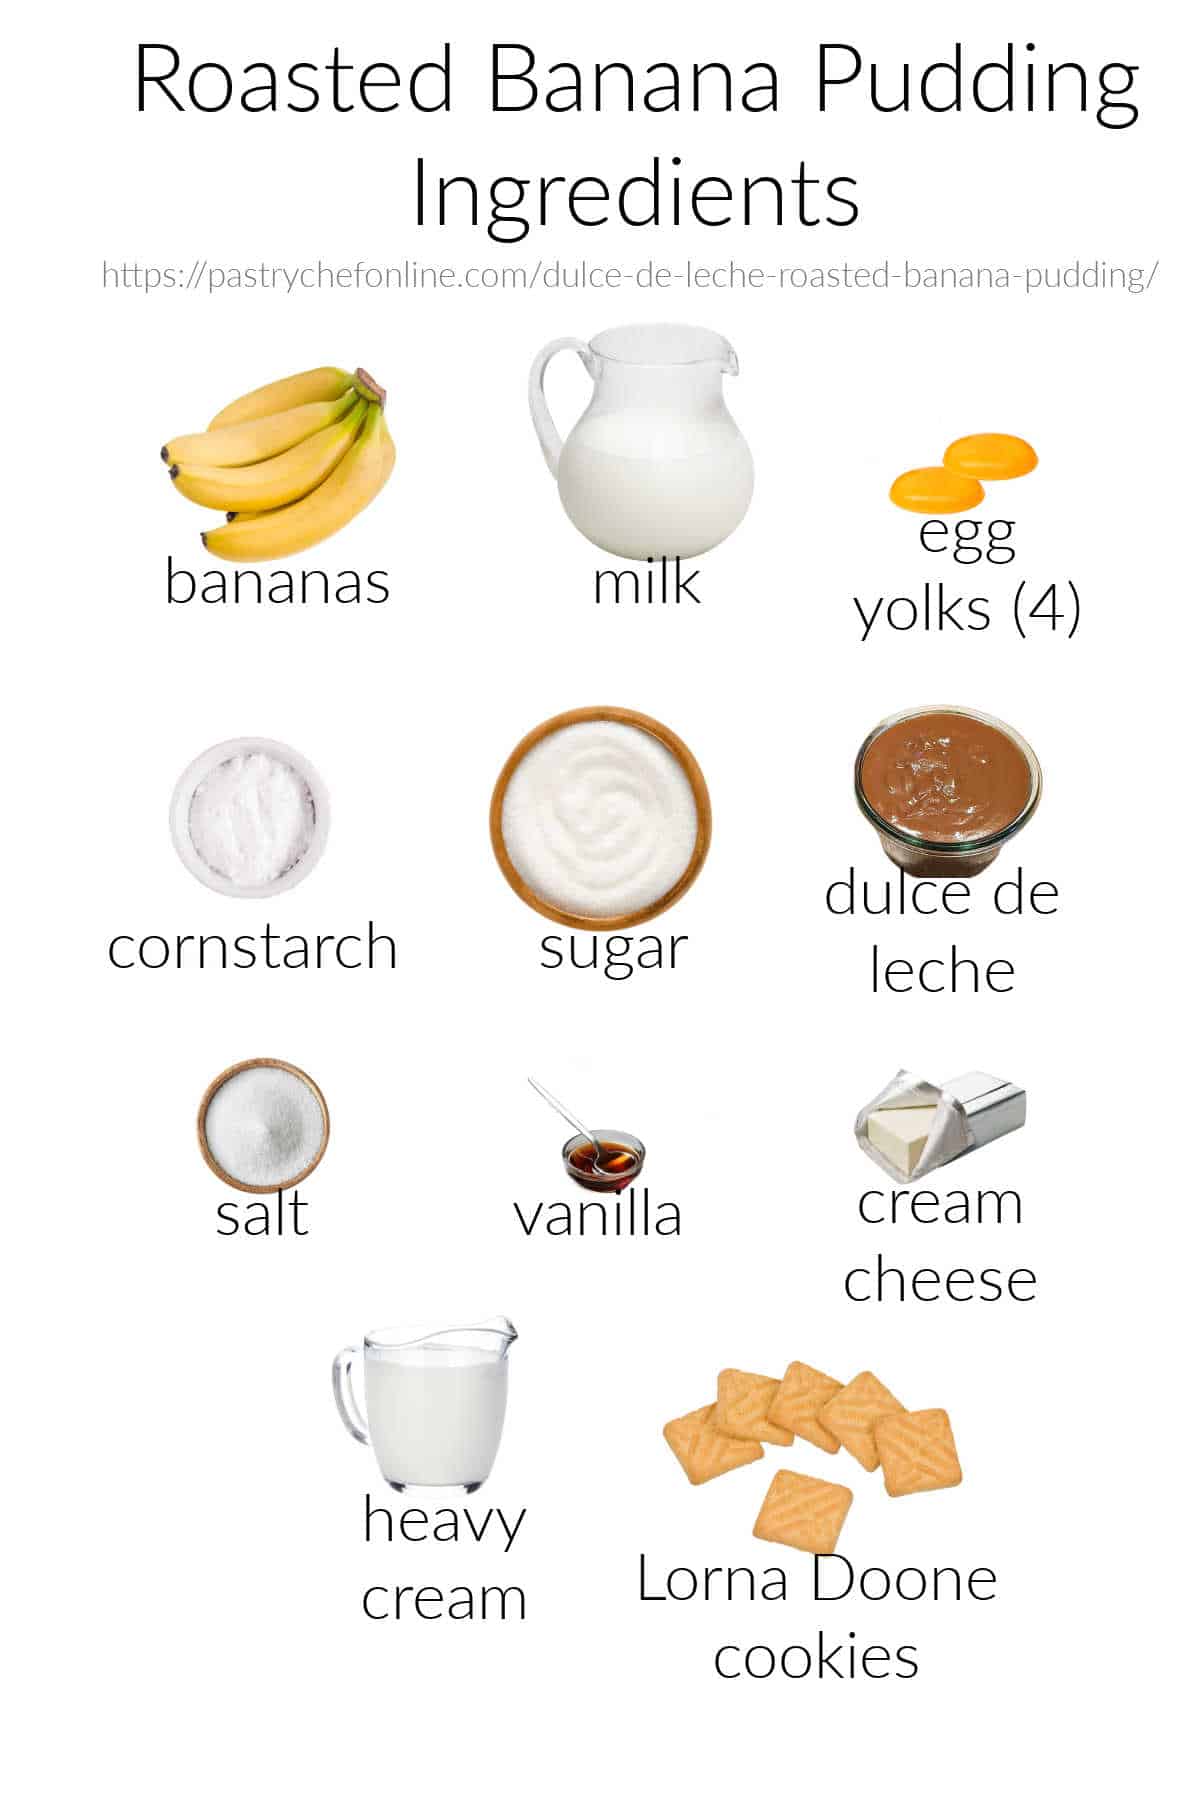 The ingredients needed for making roasted banana pudding, labeled on a white background.